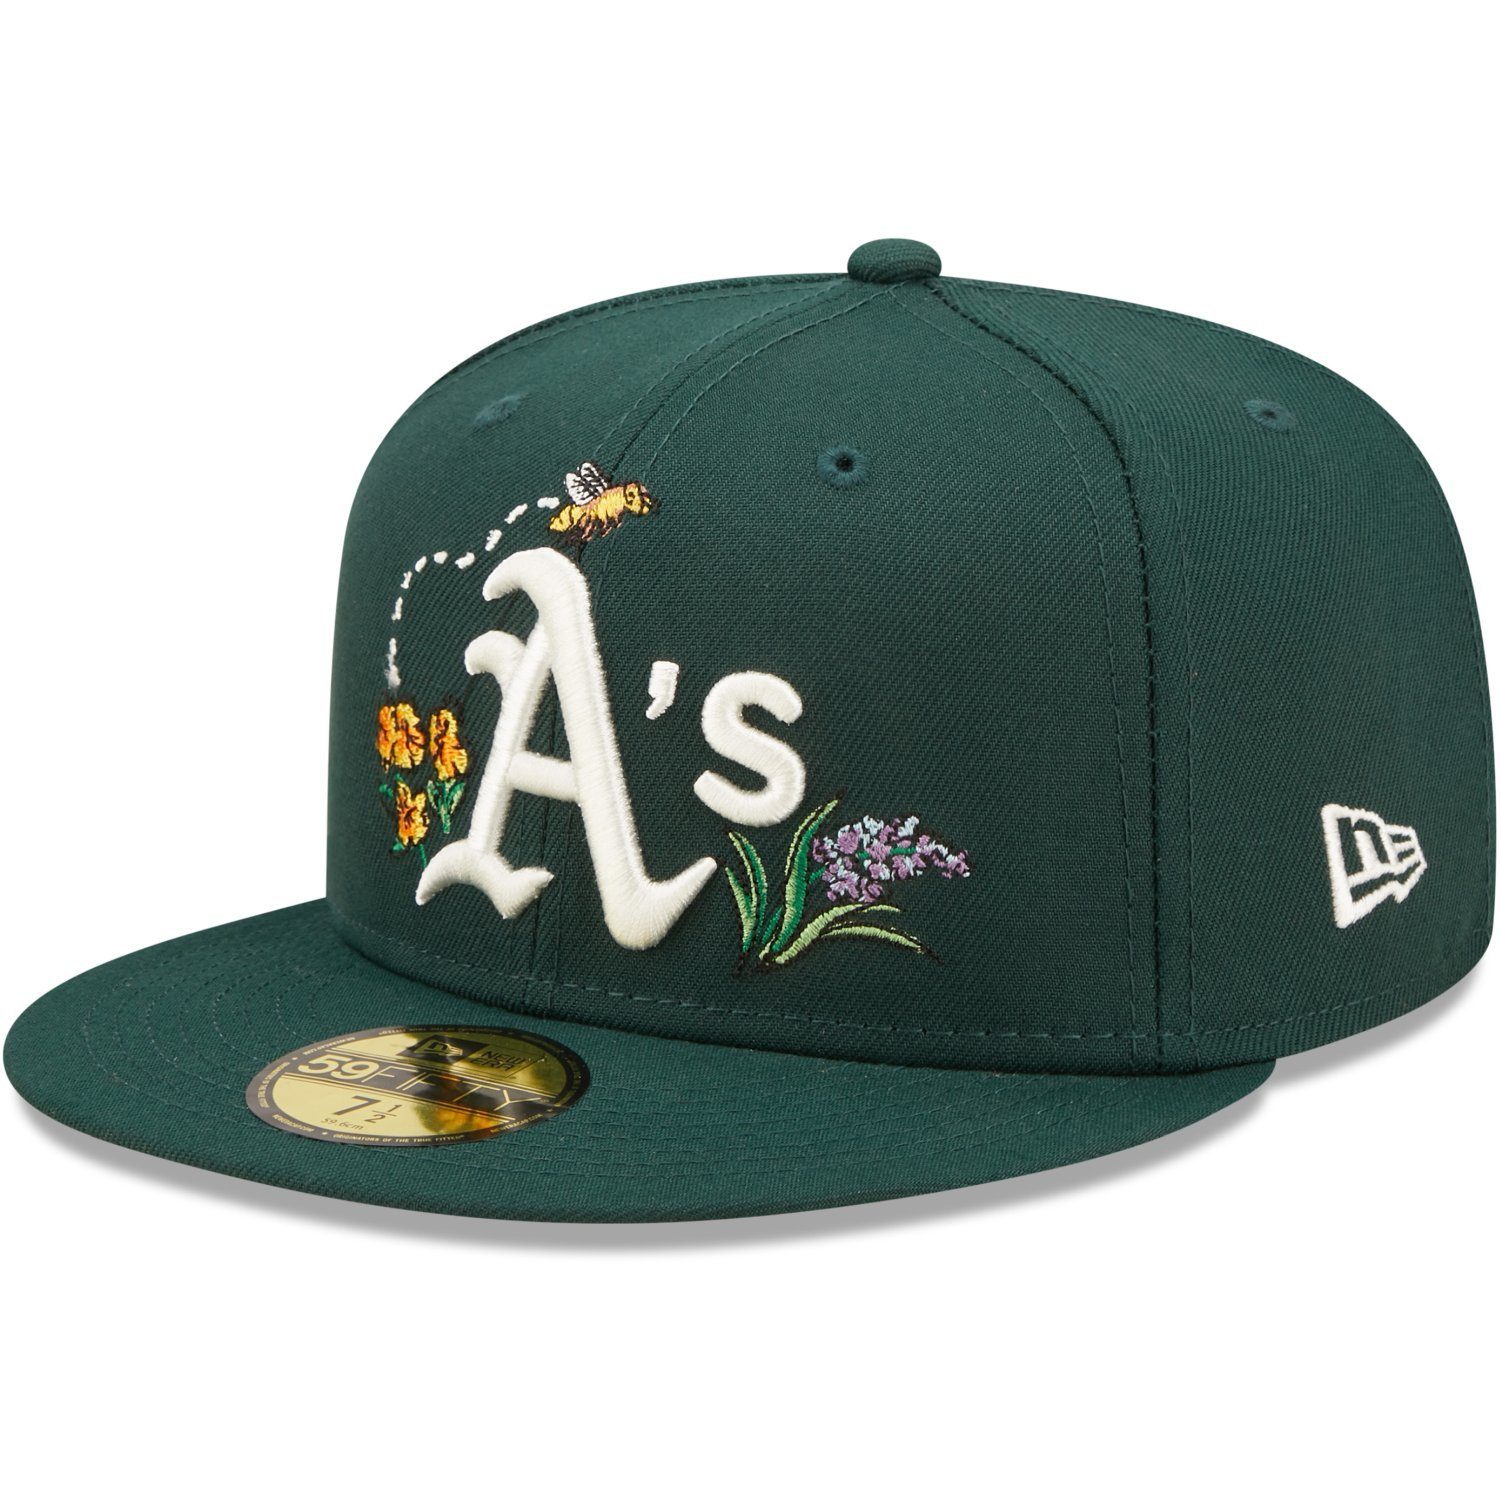 New Era Fitted Cap 59Fifty WATER FLORAL Oakland Athletics